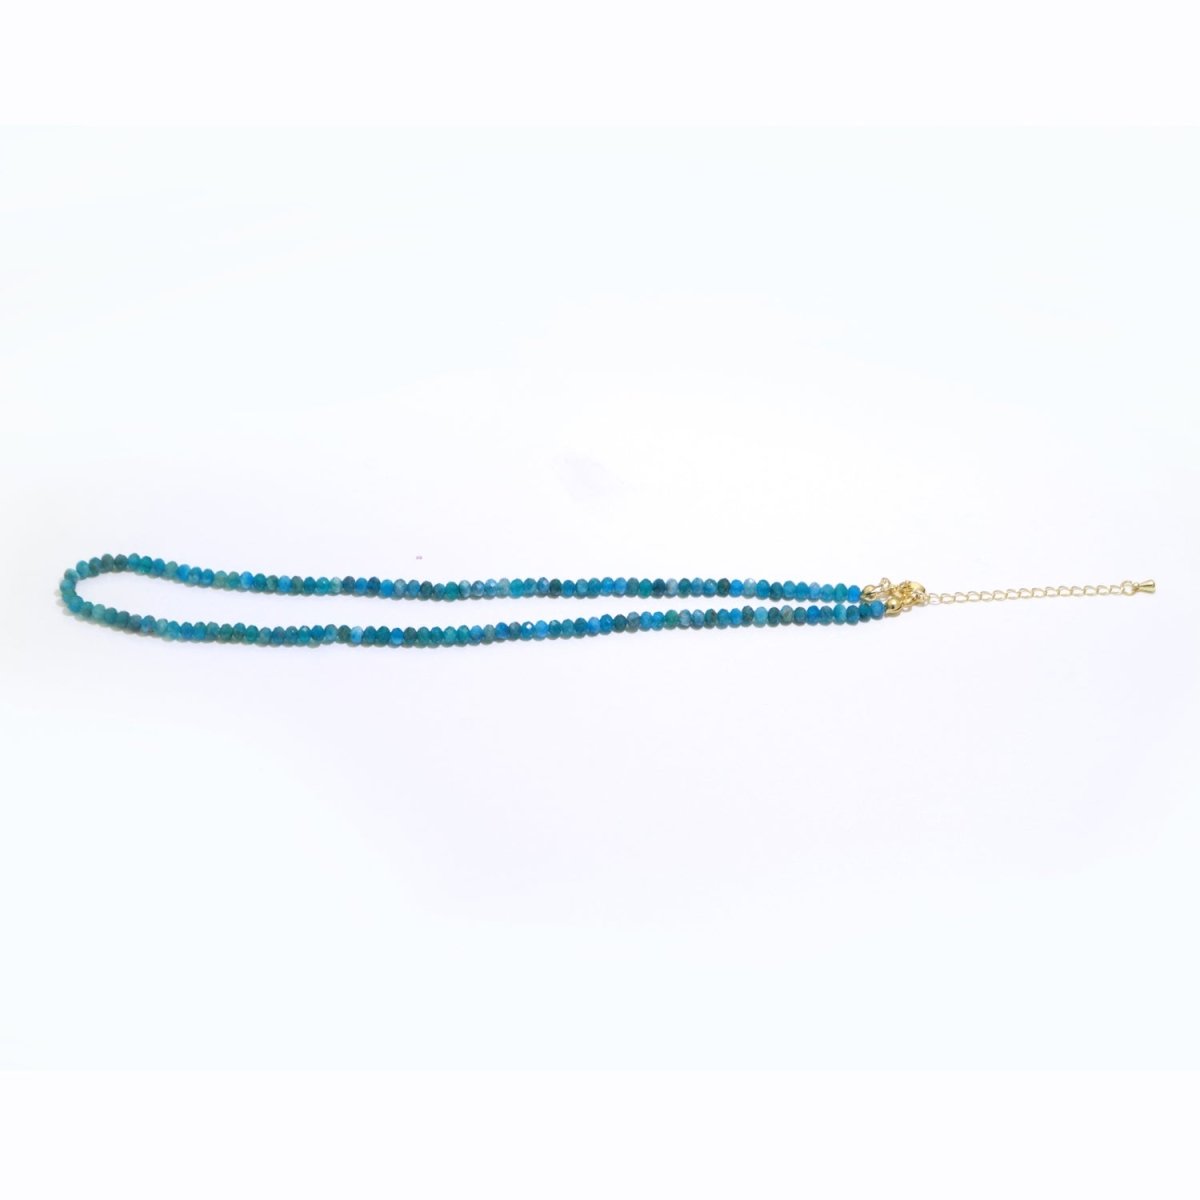 4mm Dainty Blue Apatite Natural Gemstone Bead 16.5 Inch Necklace | WA-258 Clearance Pricing - DLUXCA